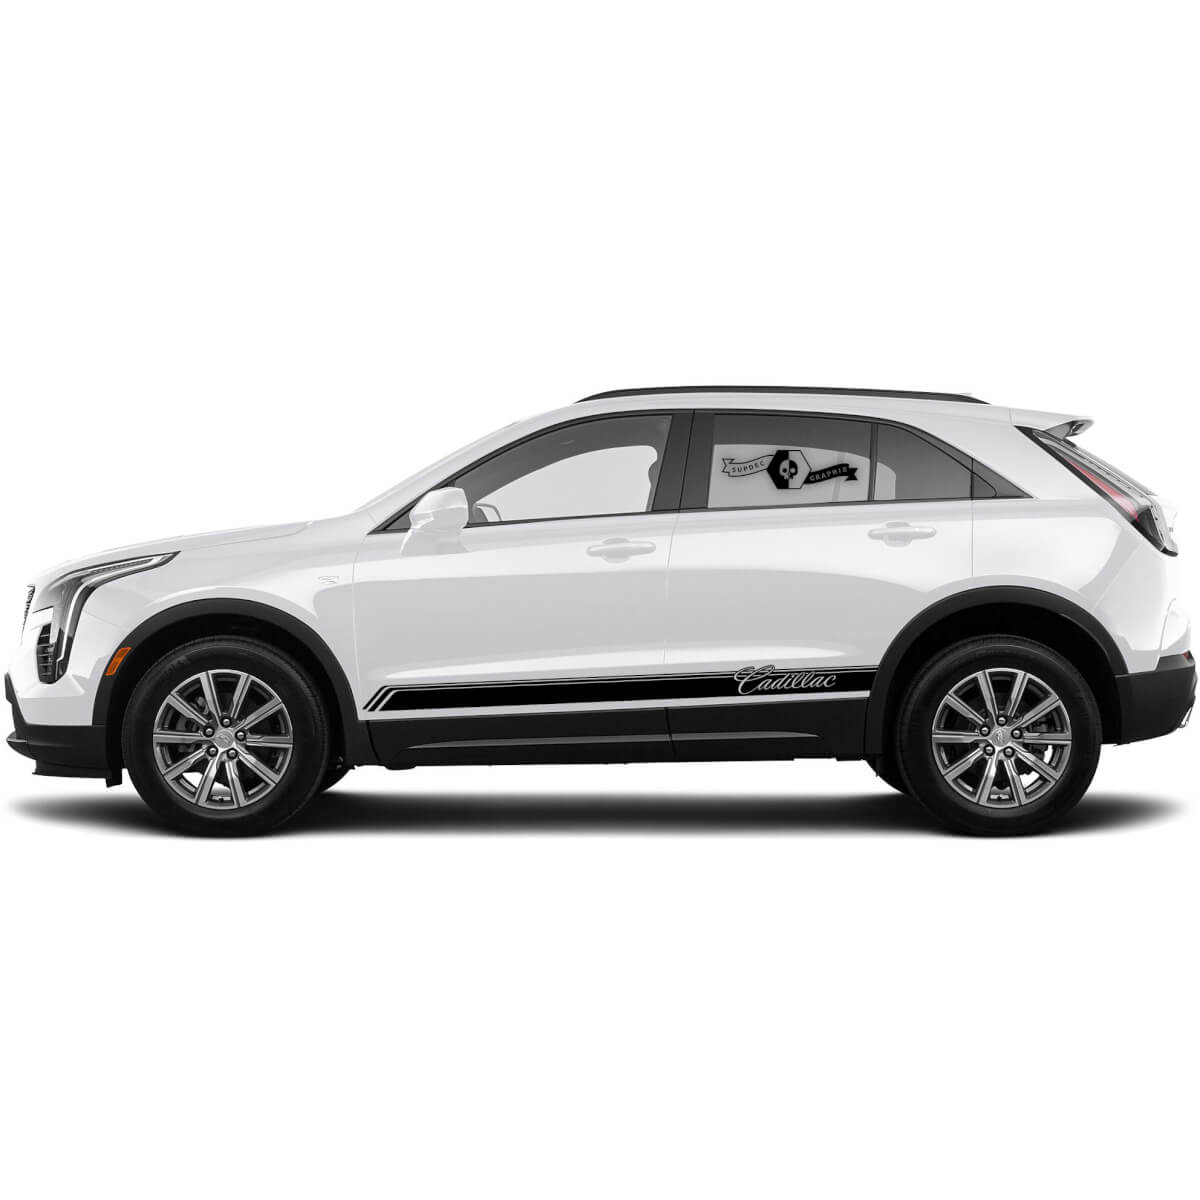 2 New Decal Rocker Panel Sticker Lines Triple Trim Thin Lines Classic Stripe for Cadillac XT4